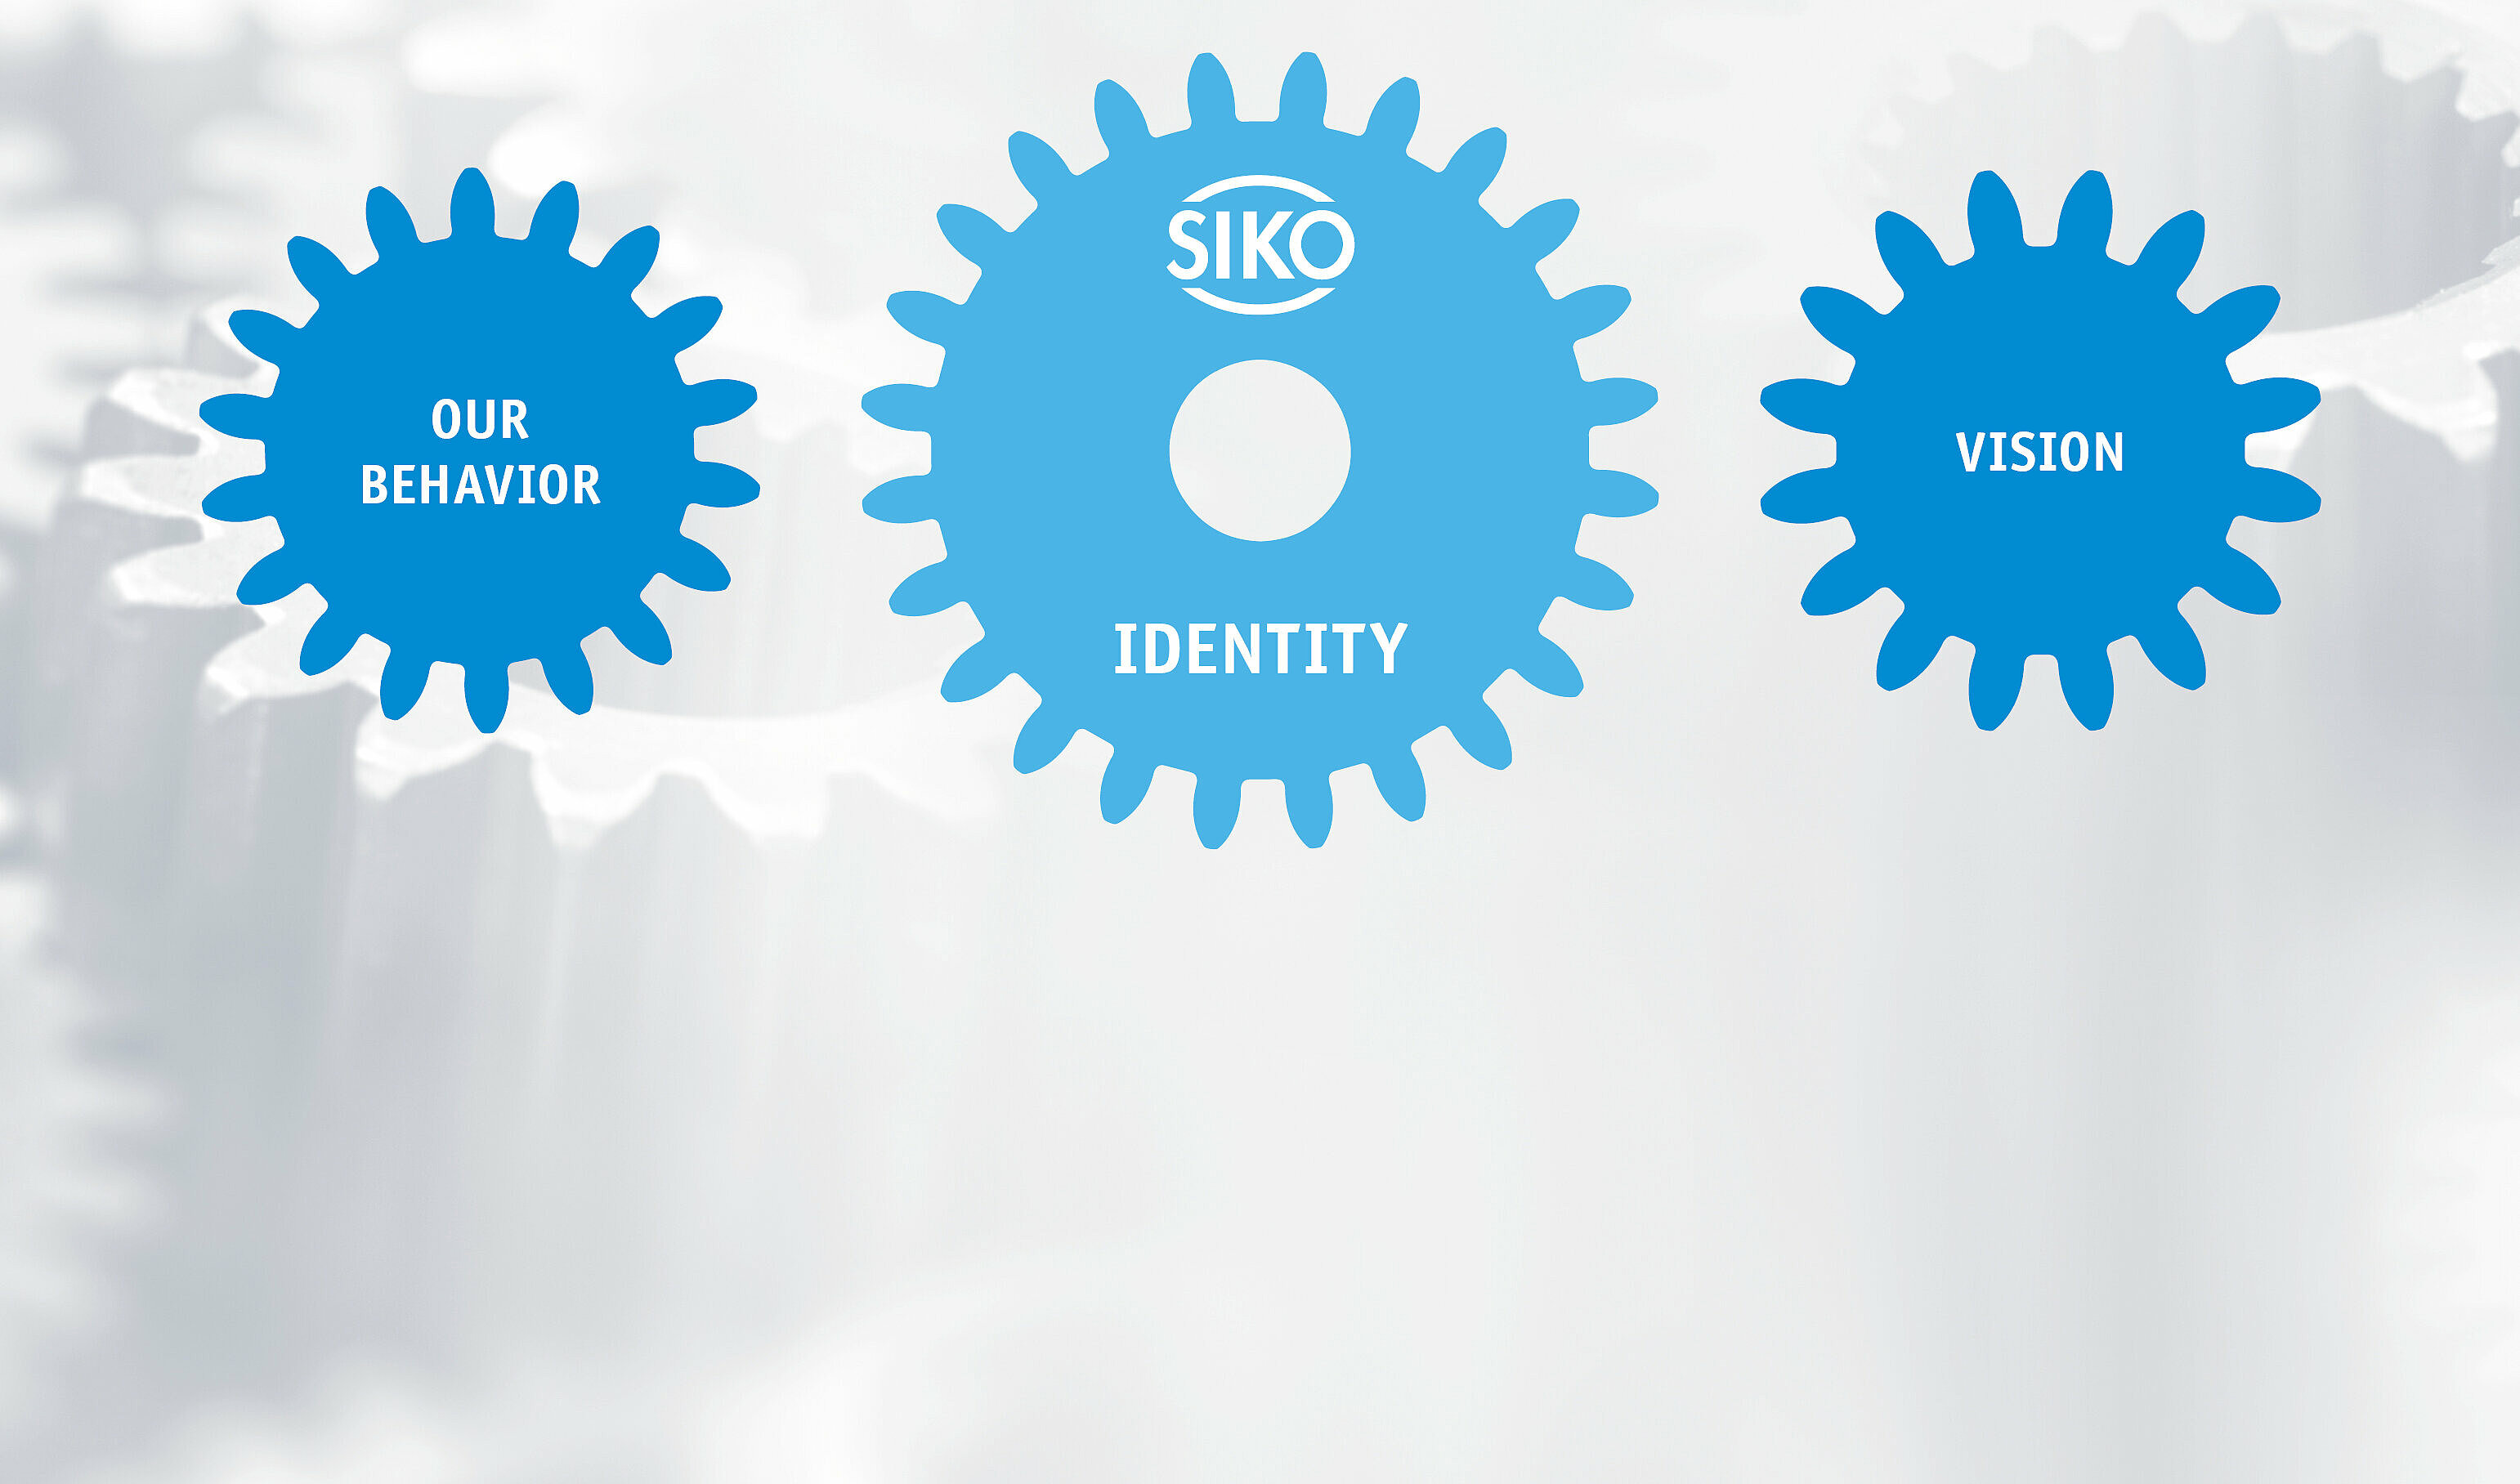 Key points of the SIKO corporate mission depicted in blue gears